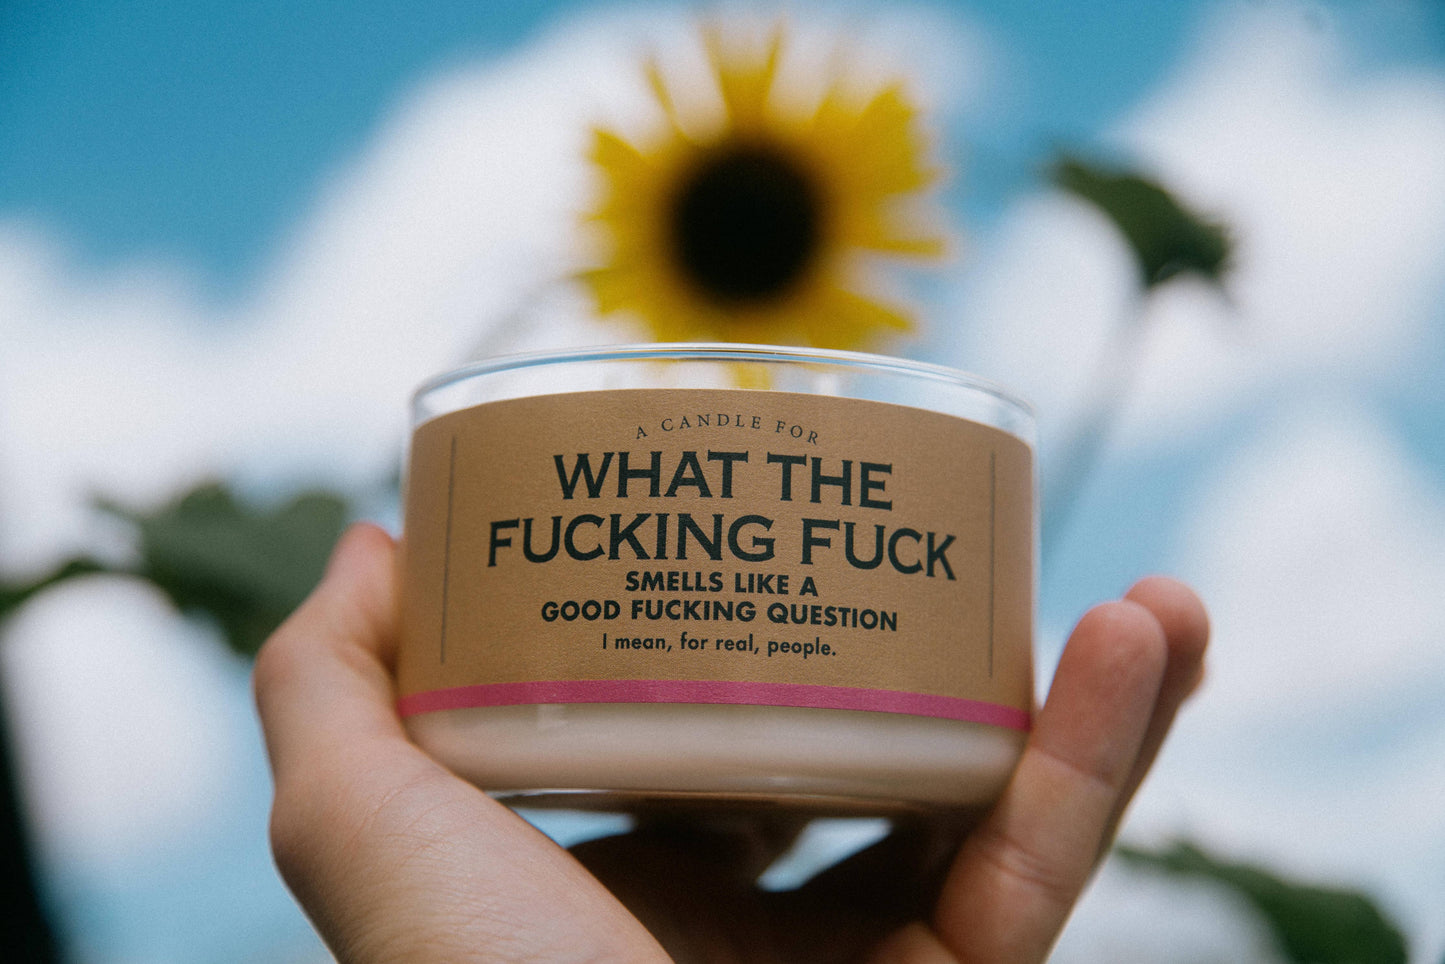 A Candle for What the Fucking Fuck | Funny Candle